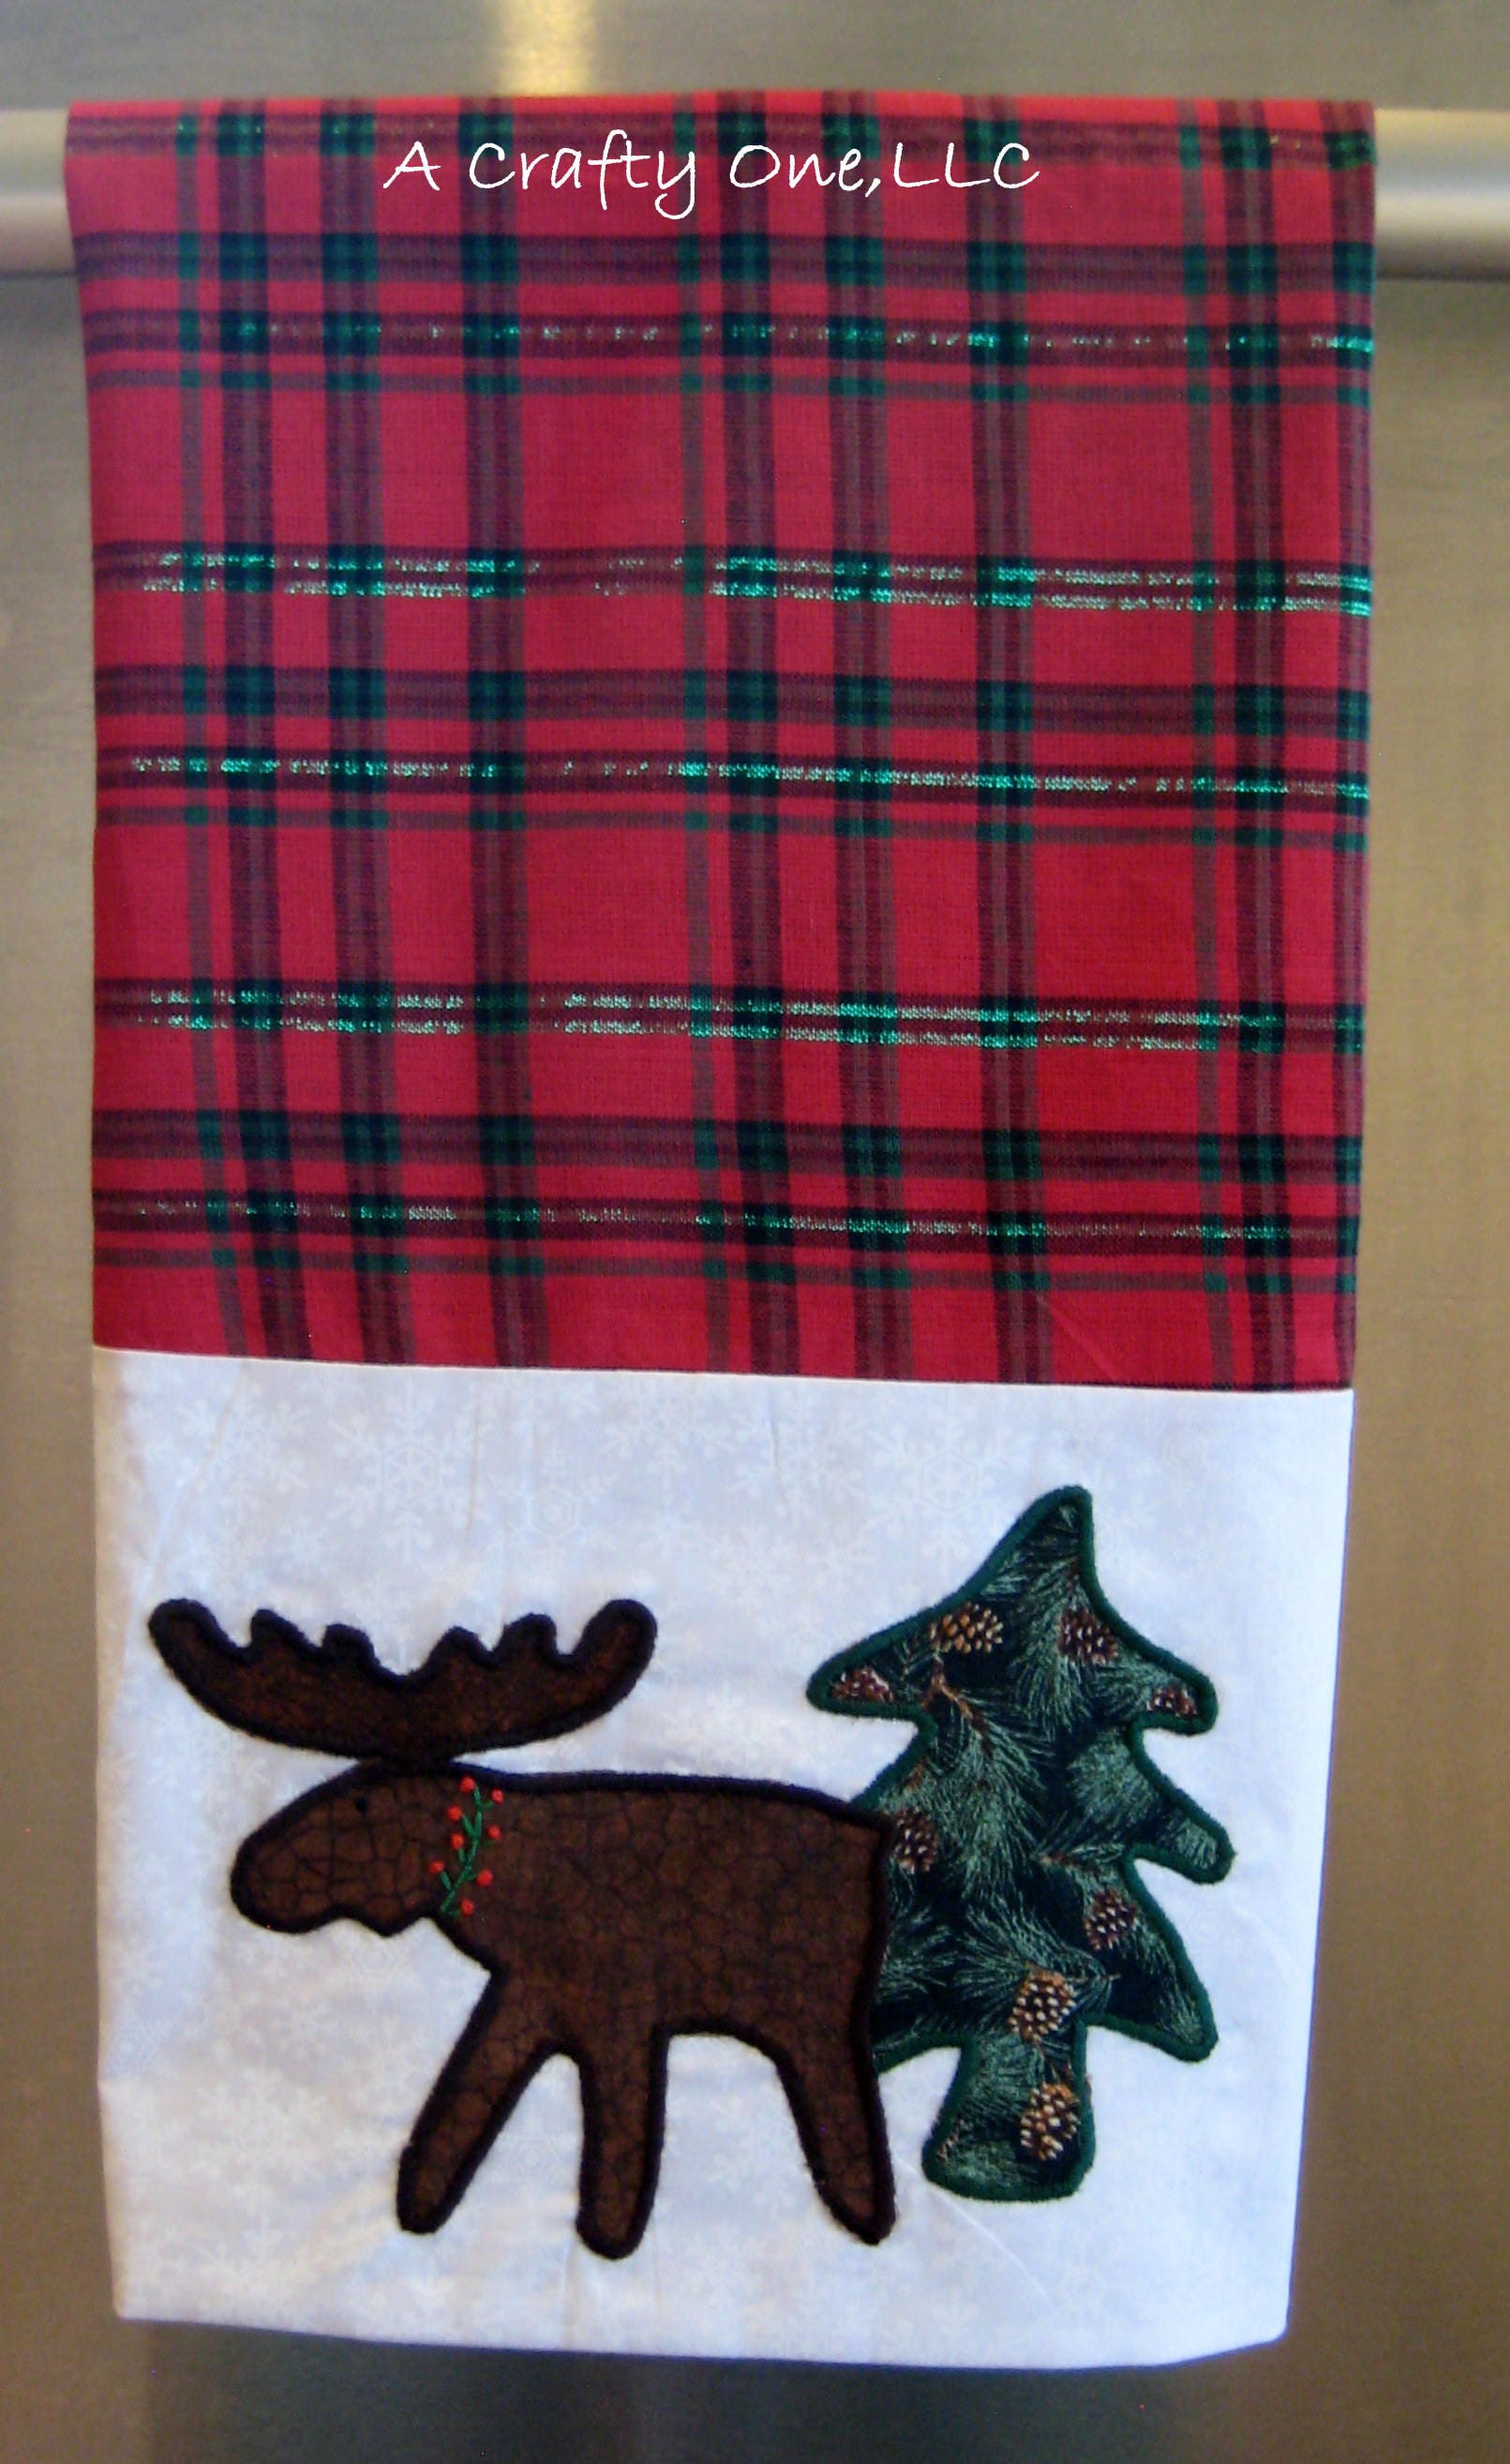 Making A Moose In The Kitchen Tea Towel — Polar Bear Gifts